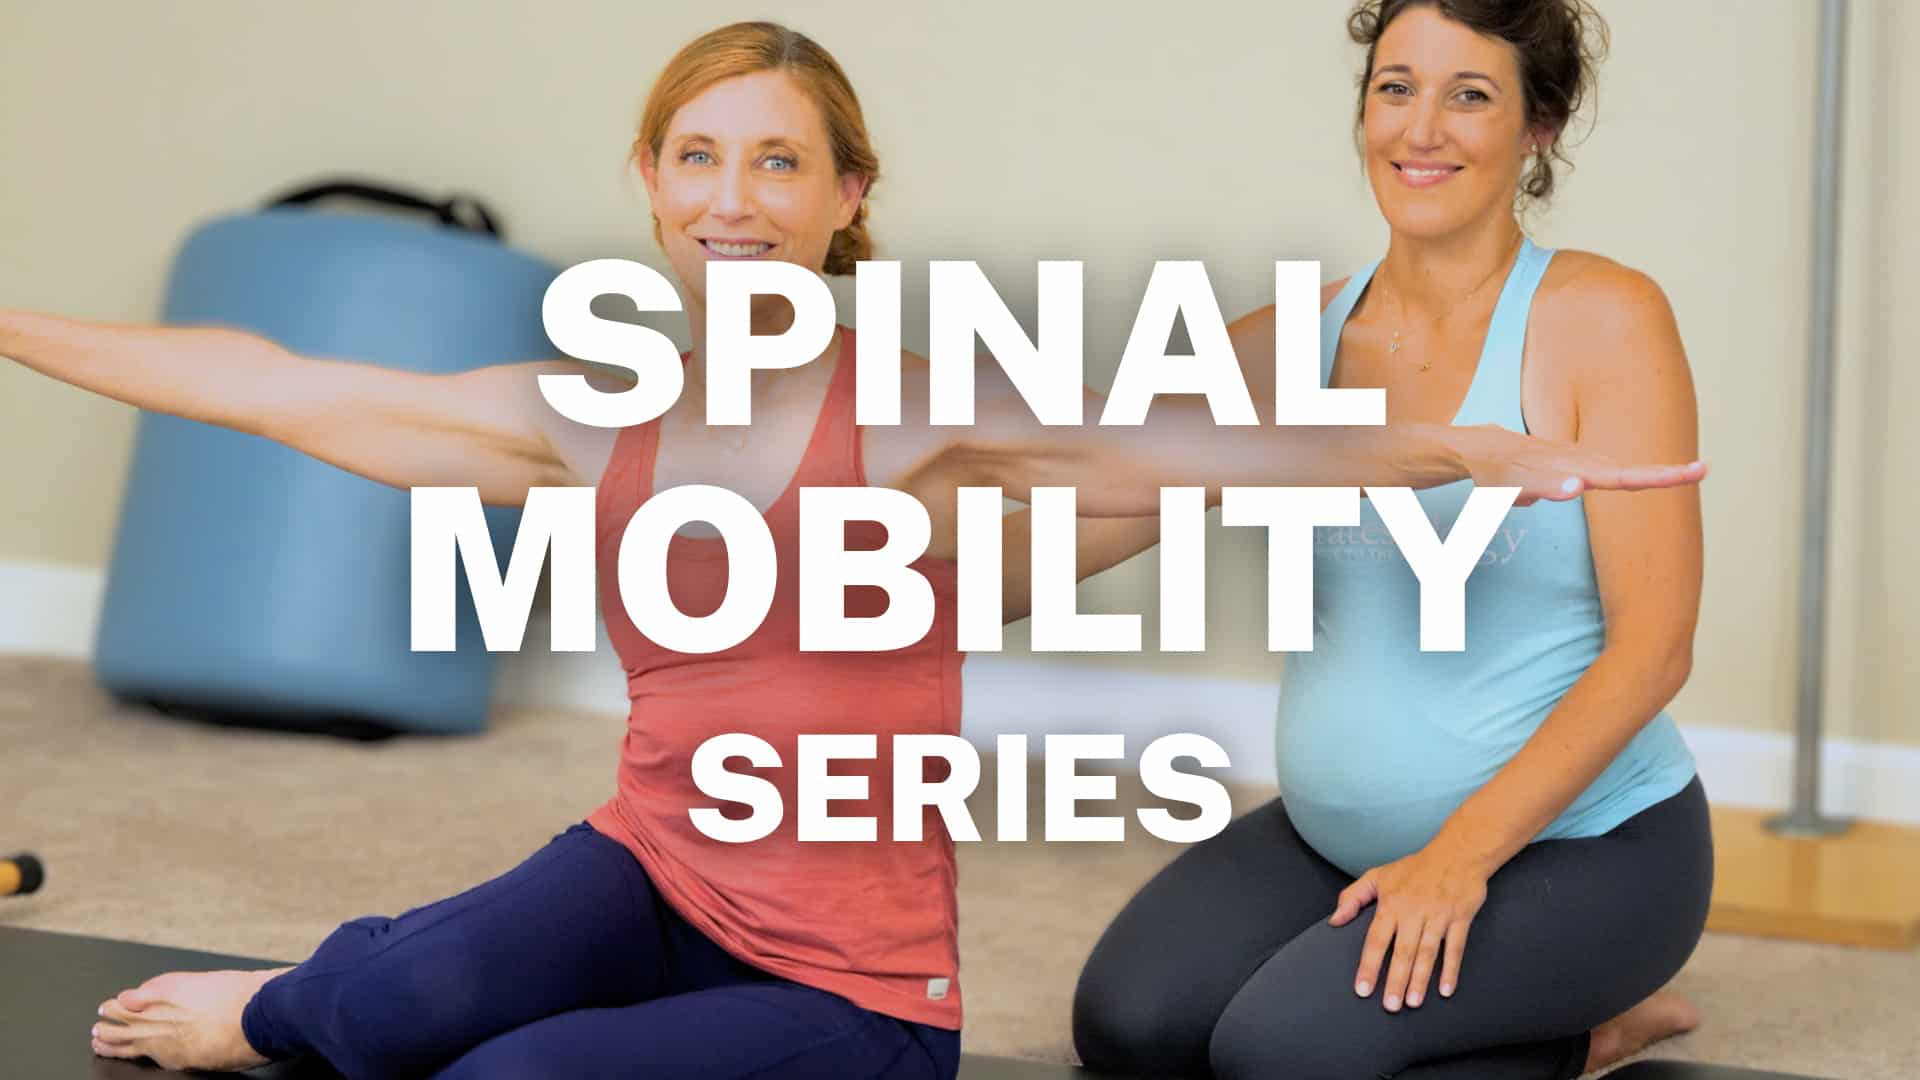 Online Progressive Pilates Series for Spinal Mobility